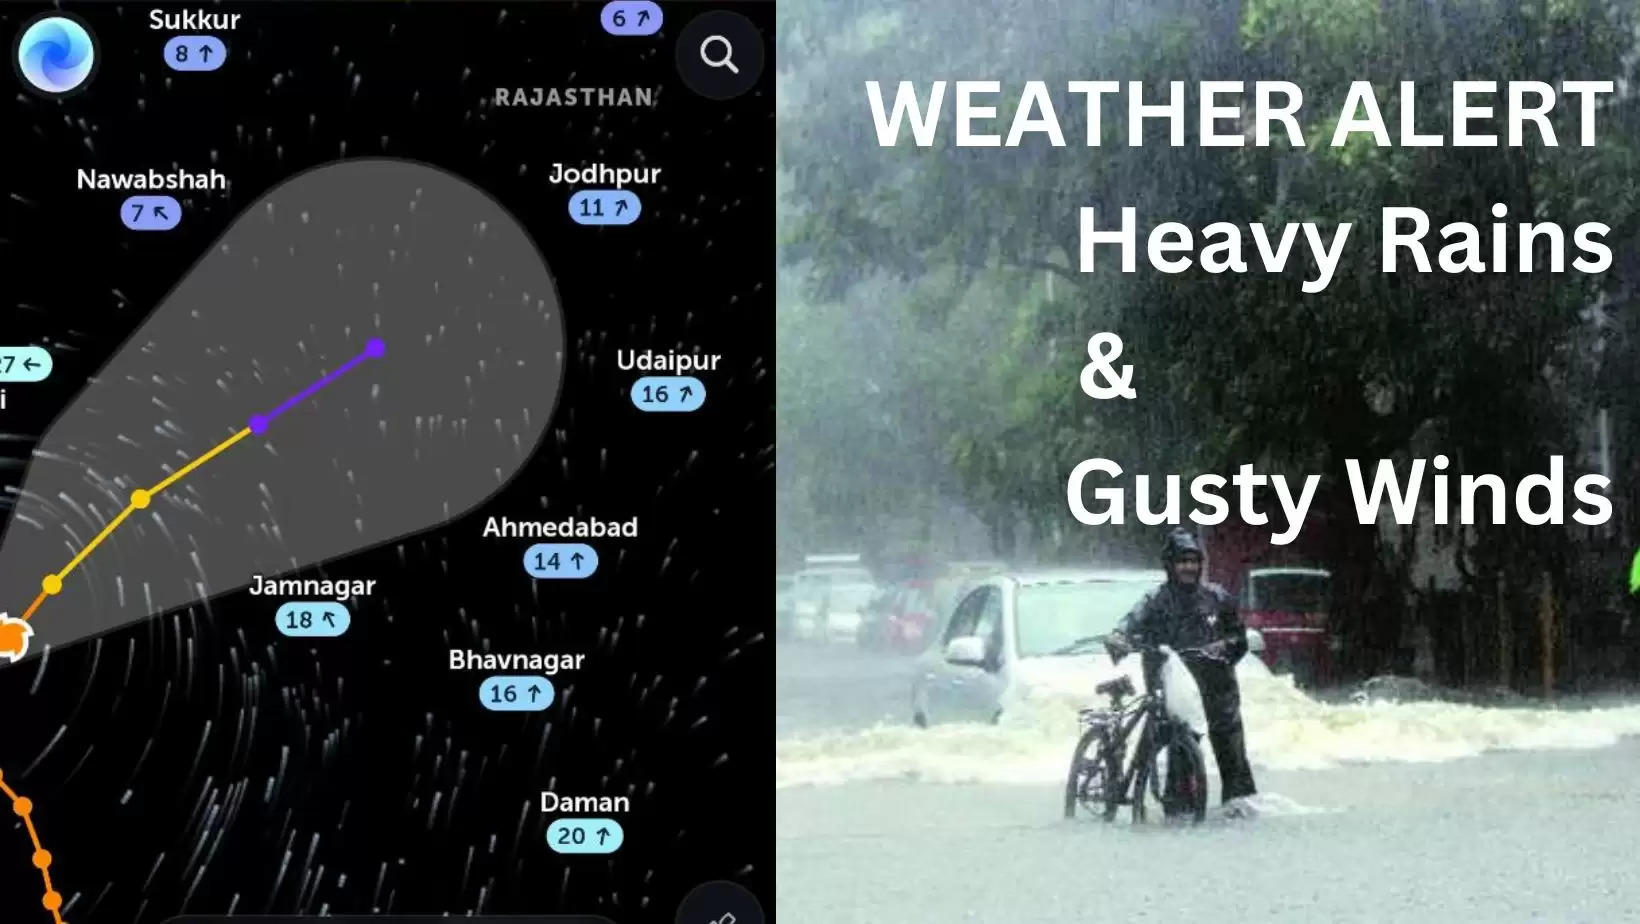 Weather  Warning in Udaipur, Weather Warning in Rajasthan, Gusty Winds, Heavy Rainfall in Udaipur